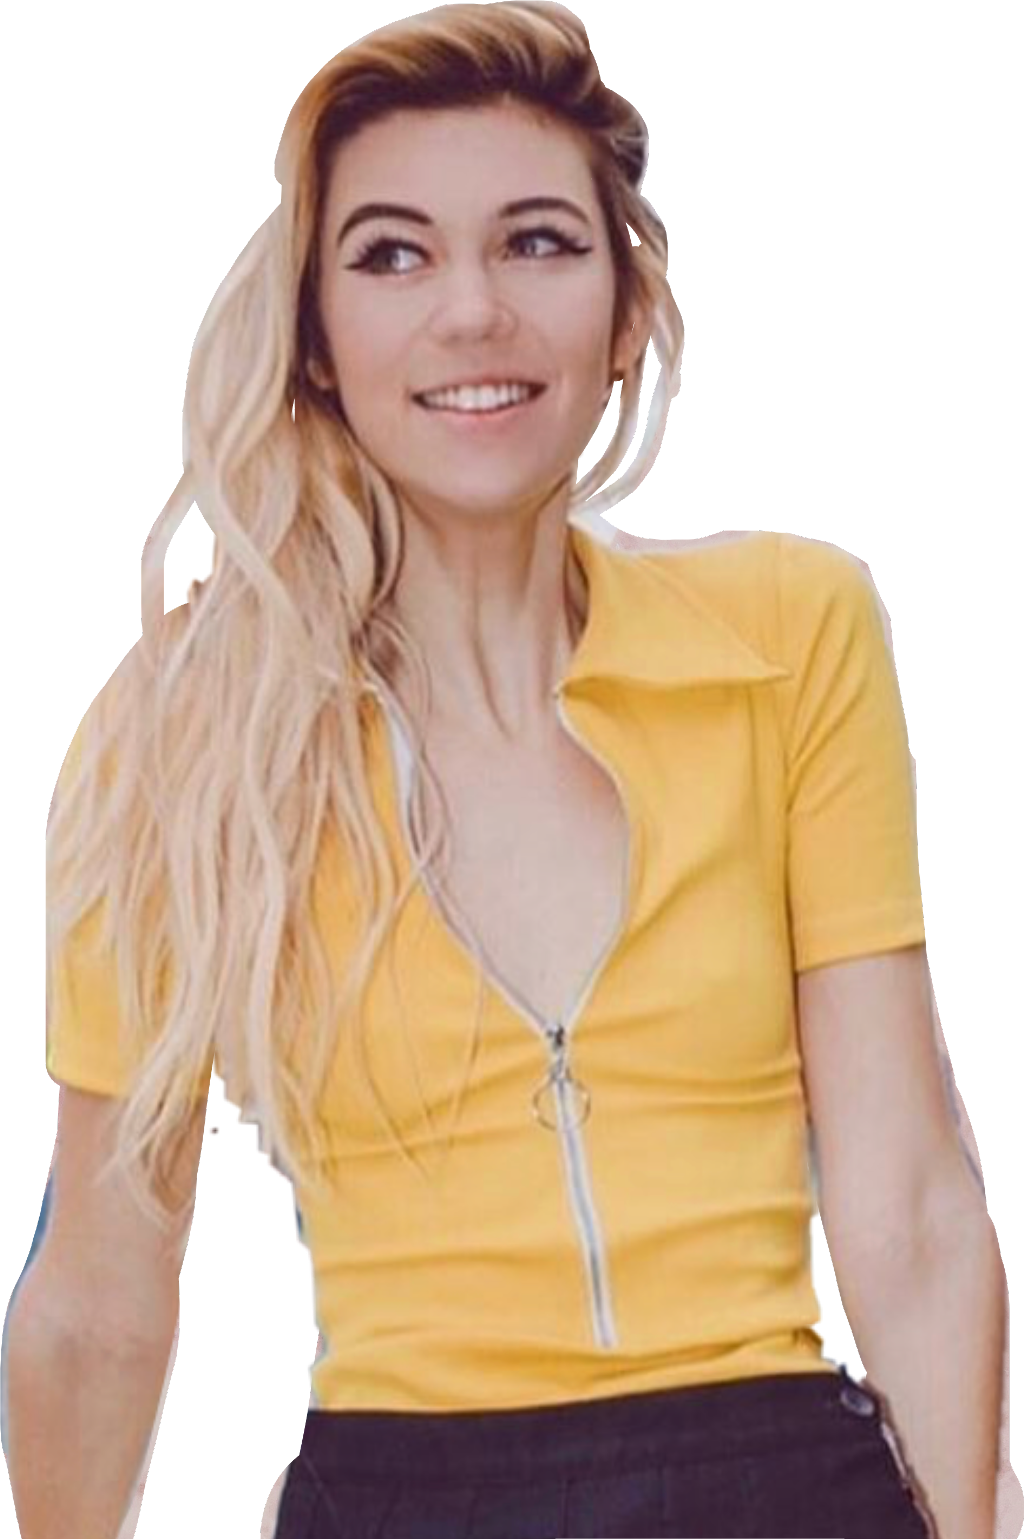 A Woman With Long Blonde Hair Wearing A Yellow Shirt